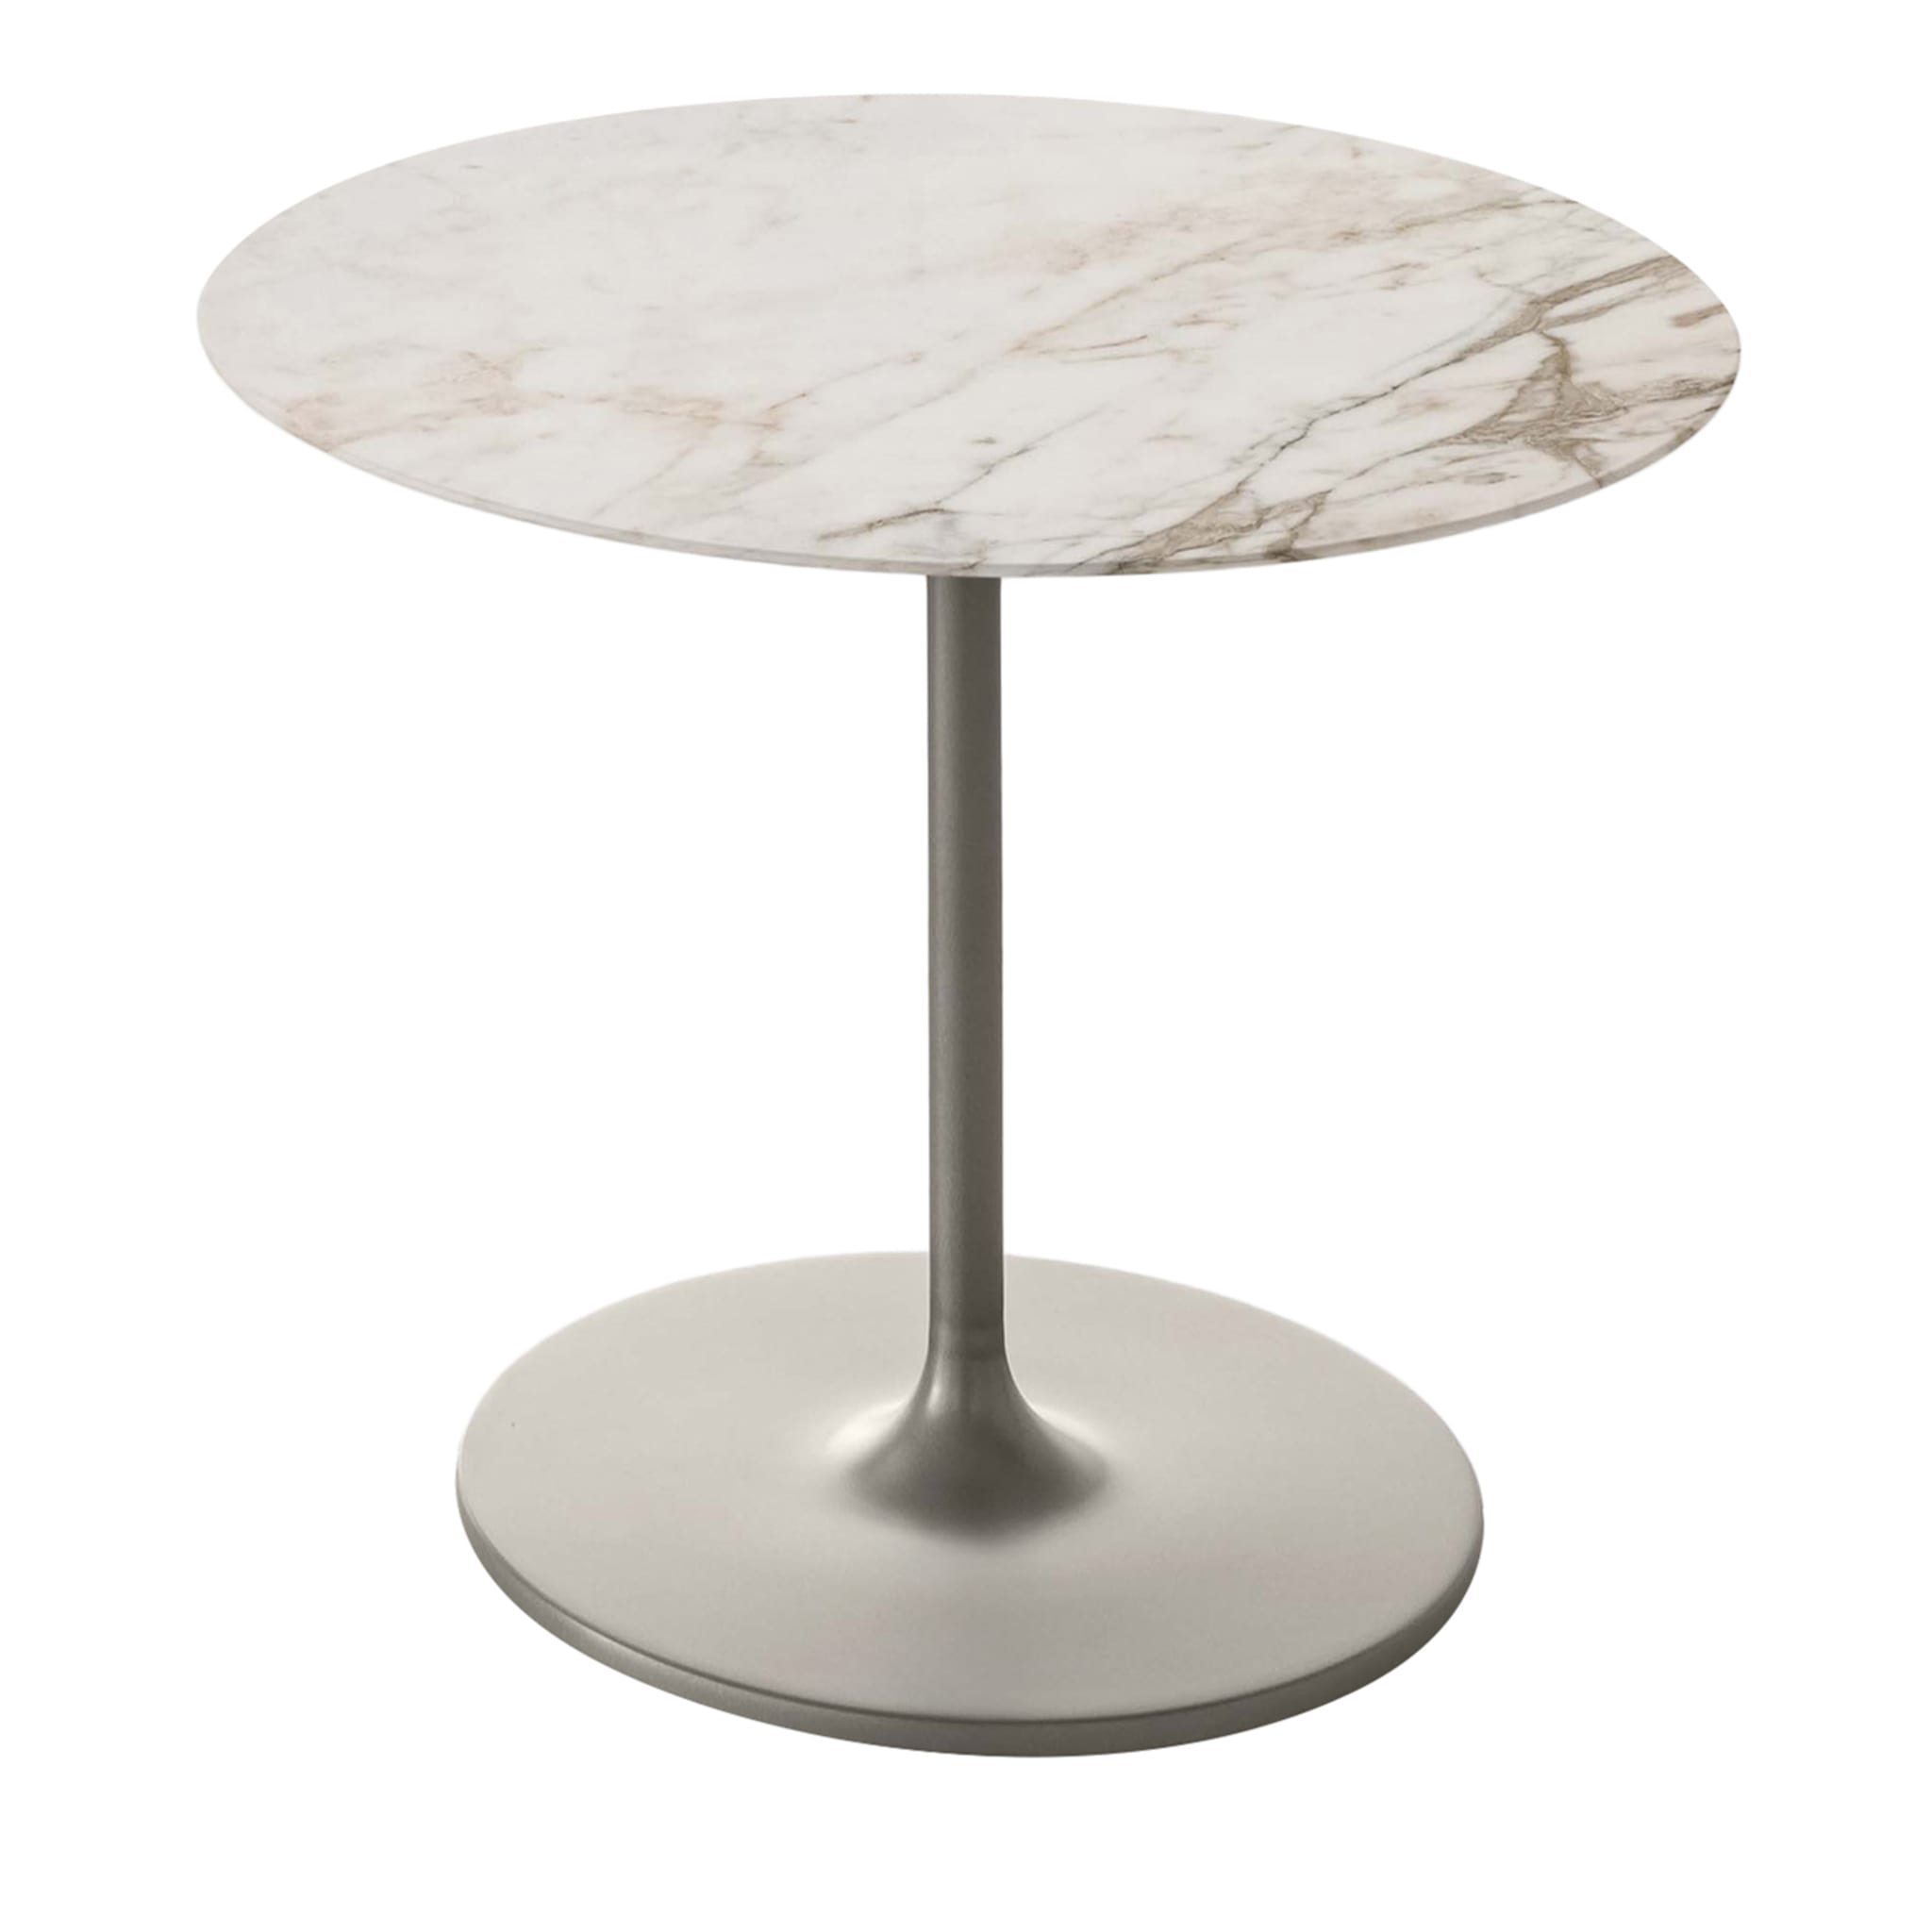 Glow Round Calacatta Marble-Top Side Table by Giuseppe Bavuso - Main view